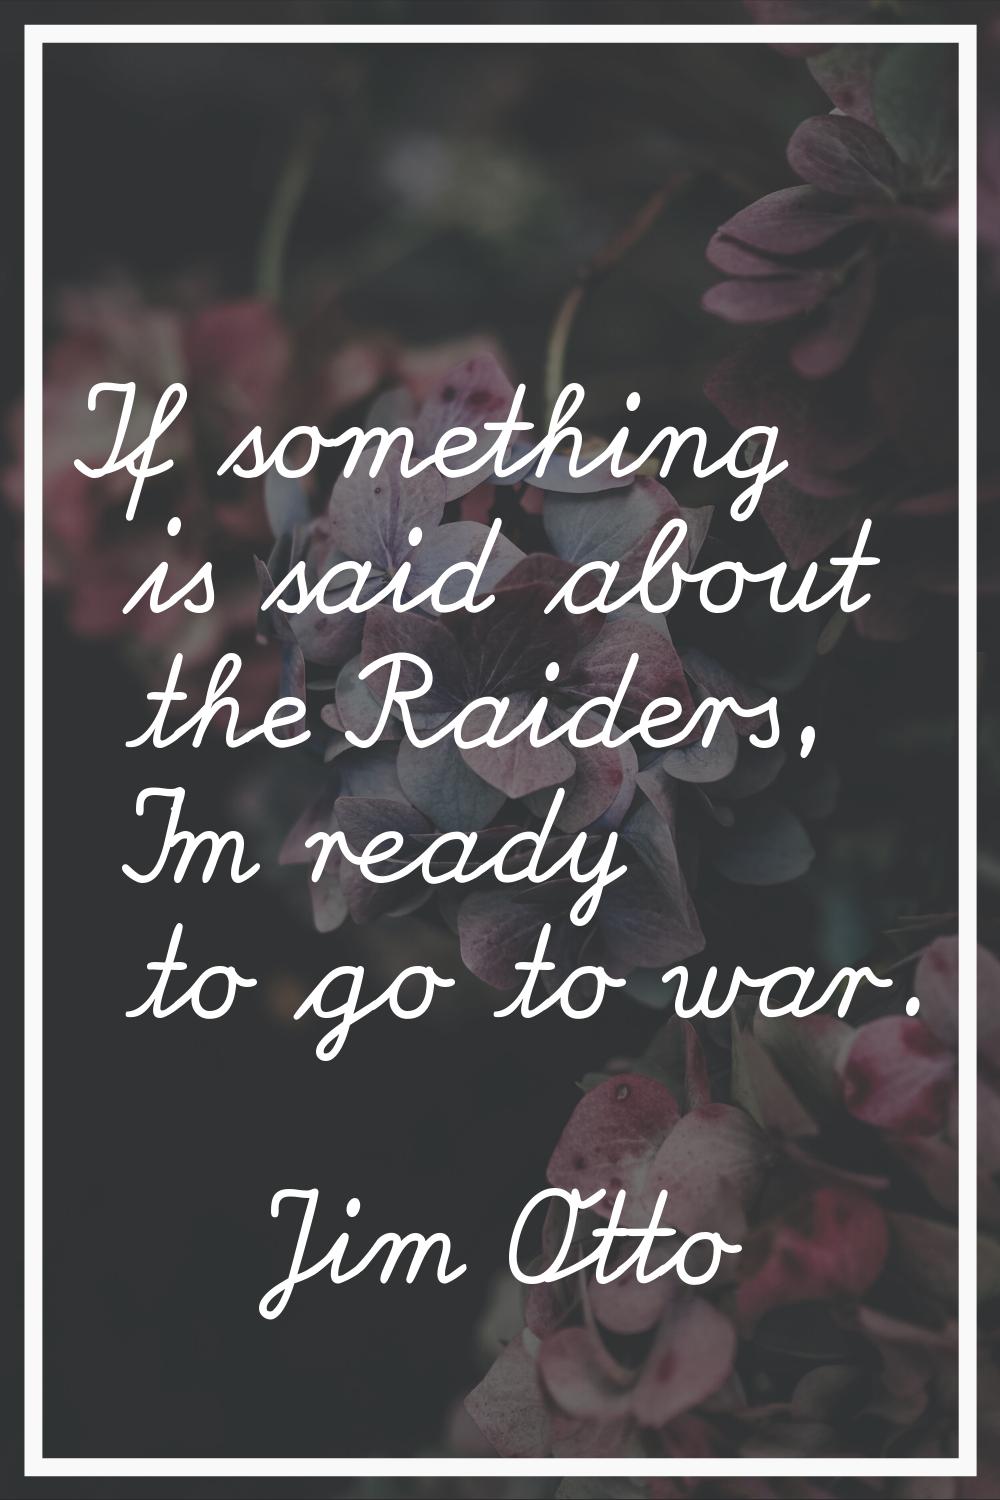 If something is said about the Raiders, I'm ready to go to war.